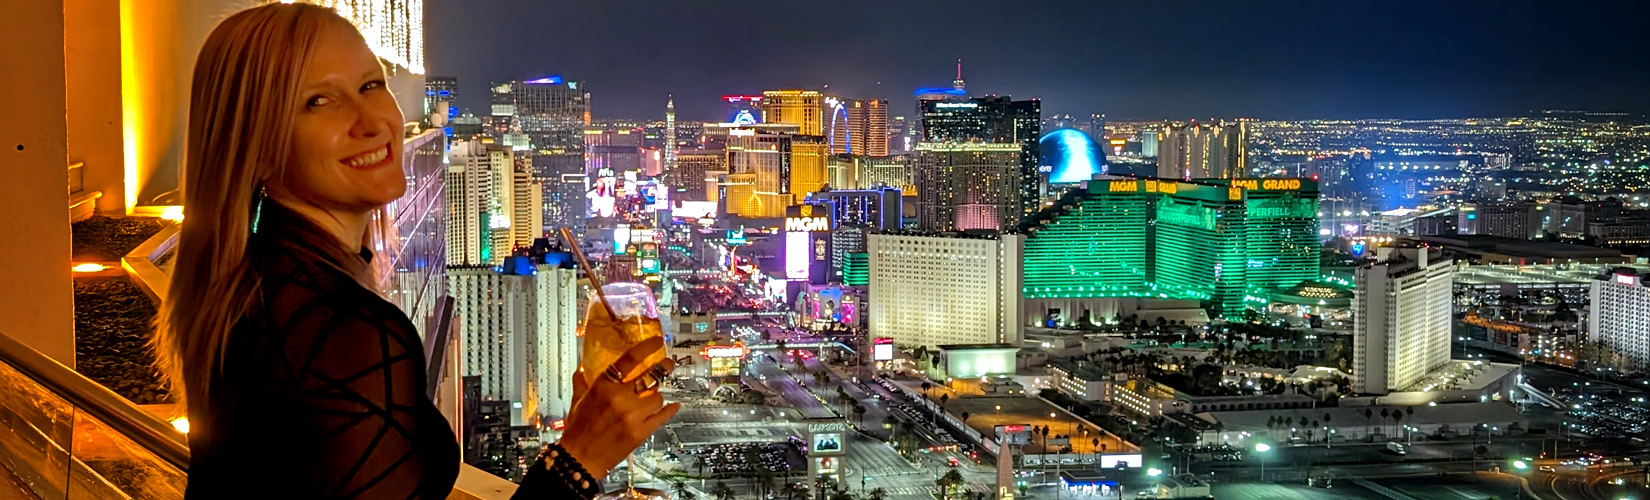 One Day in Las Vegas: A Quick but Epic Sin City Trip :: I've Been Bit! Travel Blog